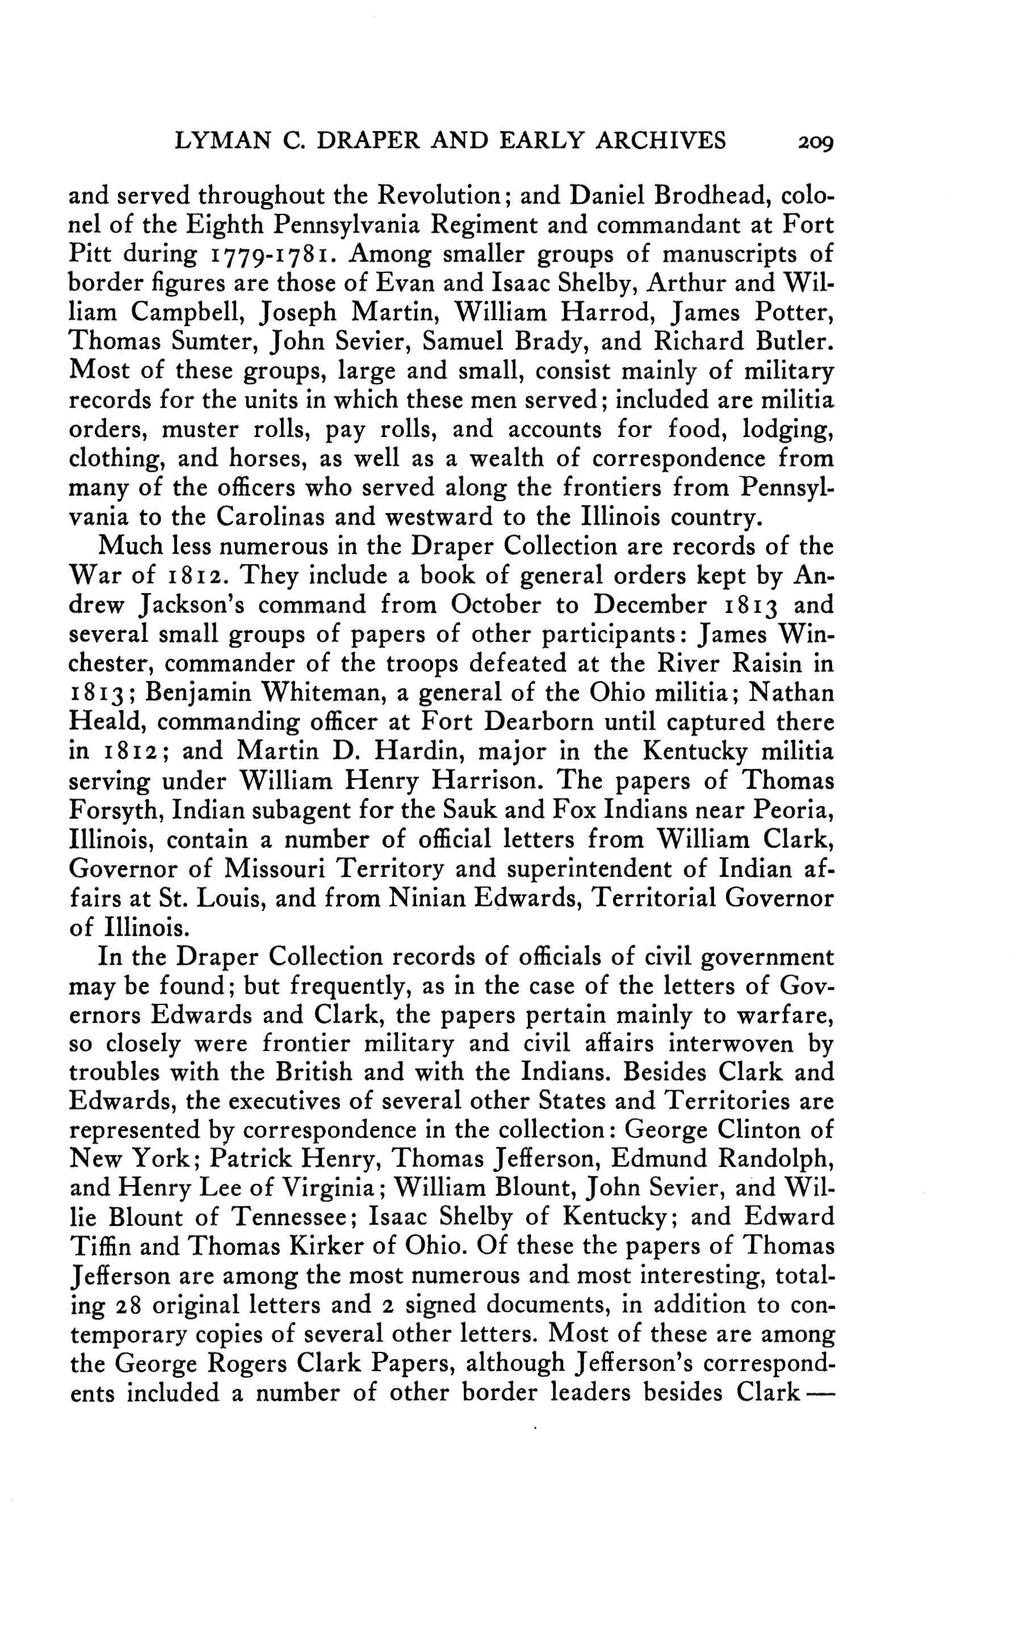 LYMAN C. DRAPER AND EARLY ARCHIVES 209 and served throughout the Revolution; and Daniel Brodhead, colonel of the Eighth Pennsylvania Regiment and commandant at Fort Pitt during 1779-1781.